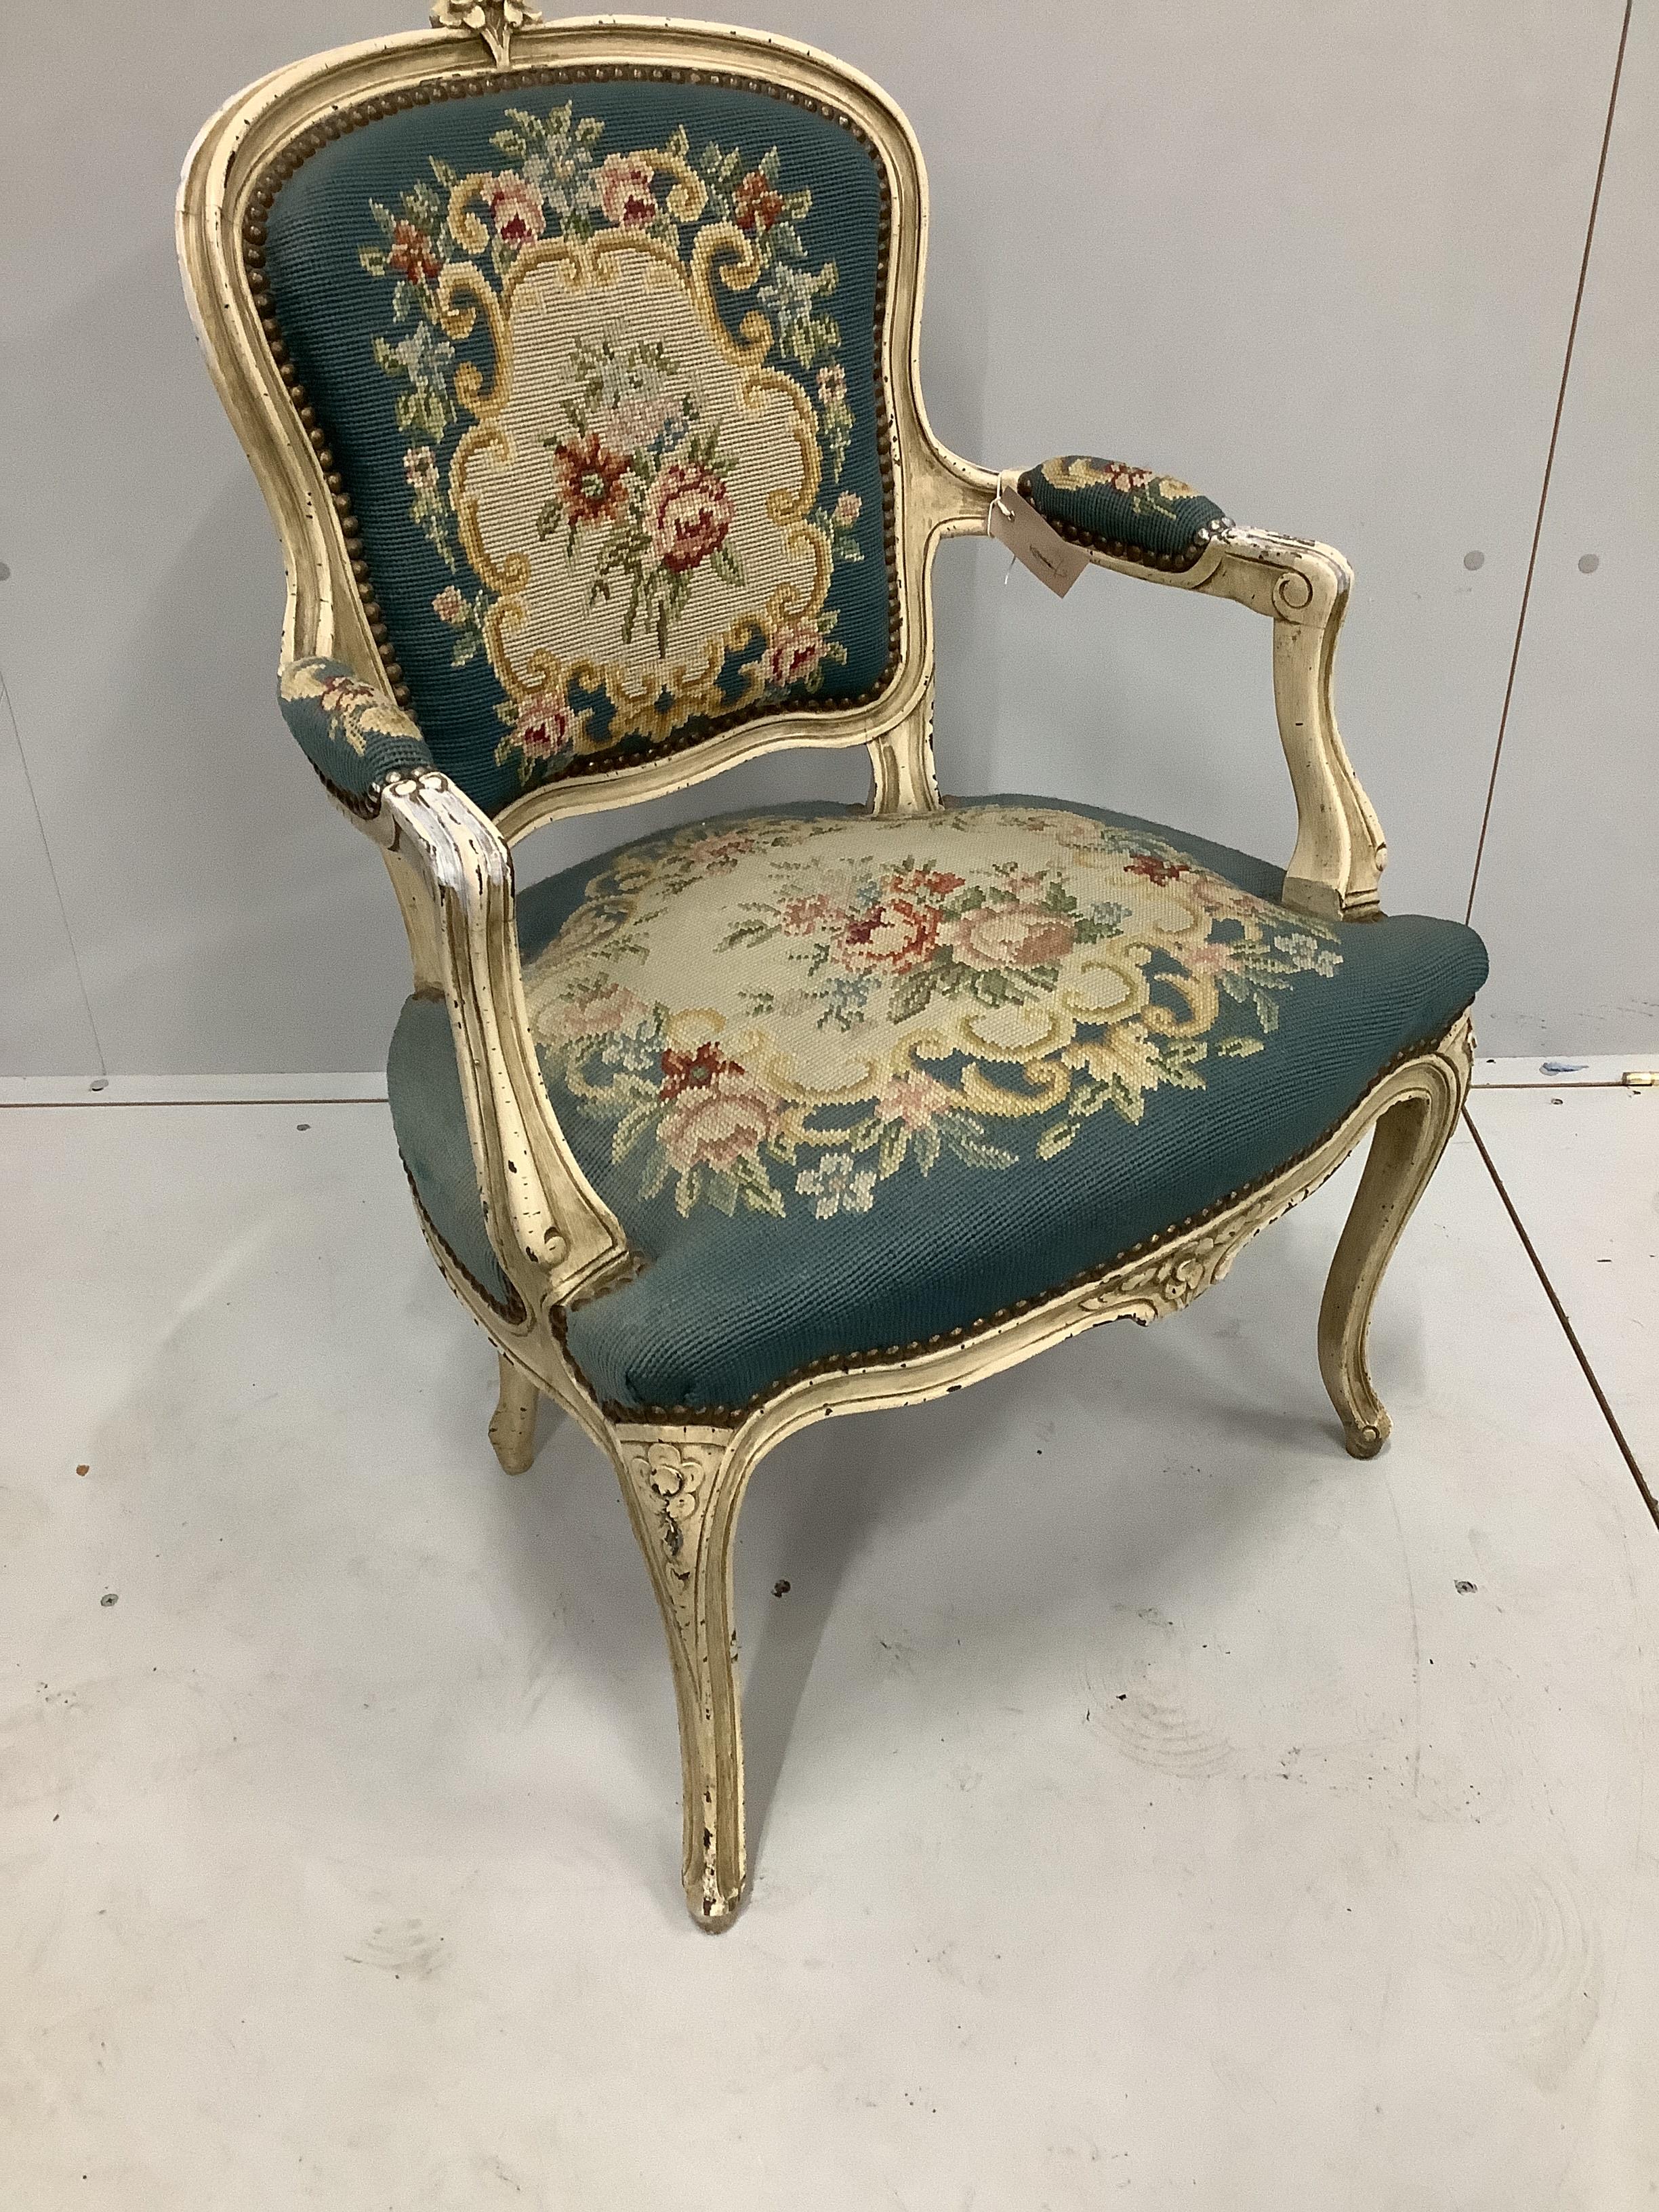 A Louis XVI style painted fauteuil with floral needlework upholstery, width 56cm, depth 50cm, height 88cm